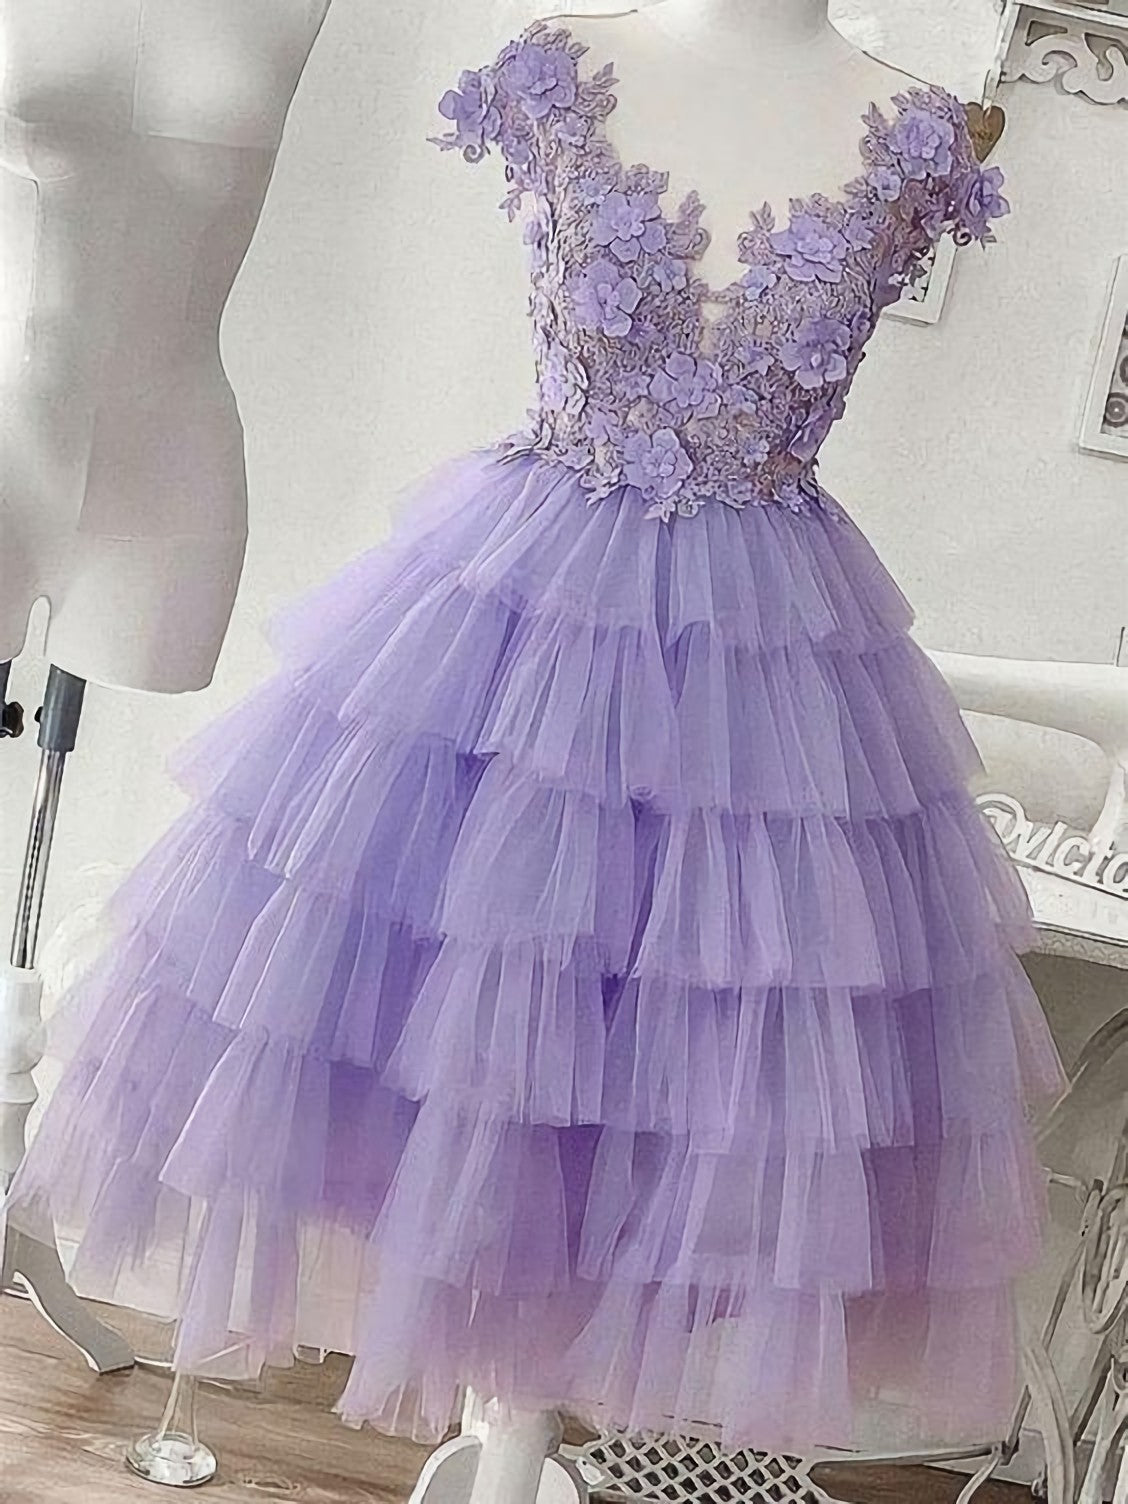 Purple Tulle Applique Short Homecoming Dress, Homecoming Dress